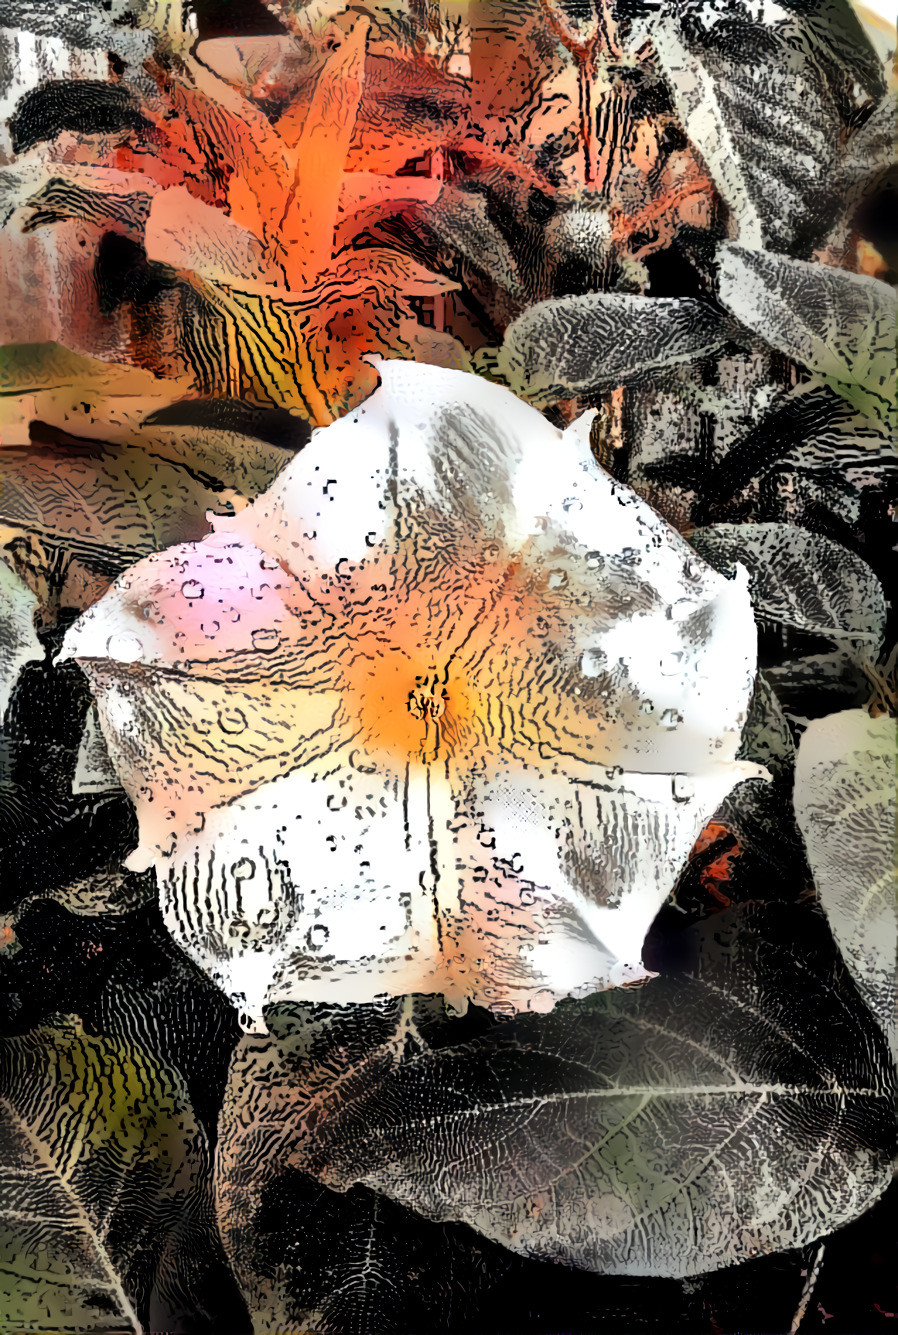 Moon Flower Madness! My Image & Re-worked Style